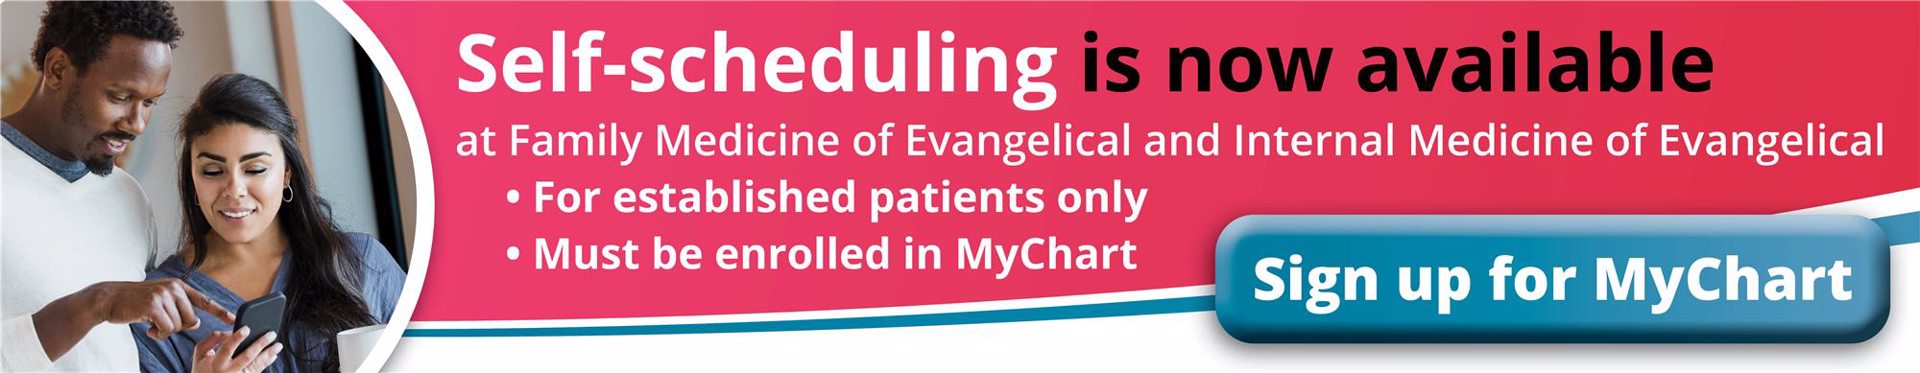 Self-scheduling is now available at Family Medicine of Evangelical and Internal Medicine of Evangelical